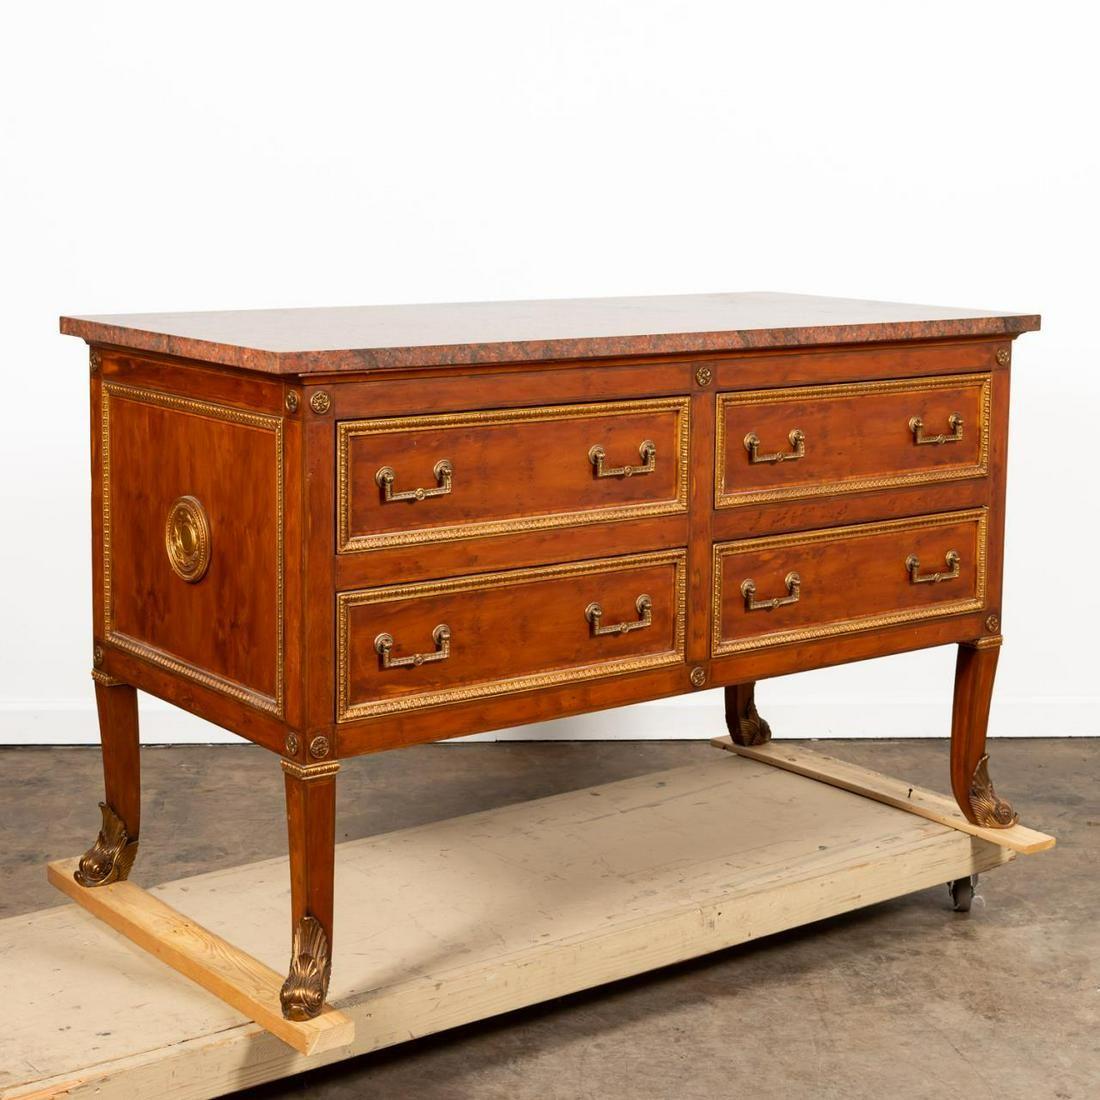 Contemporary. Parcel gilt burl wood veneered commode or chest in the regency taste, having a red marble top, corner rosettes, the four-drawers and sides with rais-de-coeur detail, and rising on tapering curved legs with dolphin-form sabots. CPI